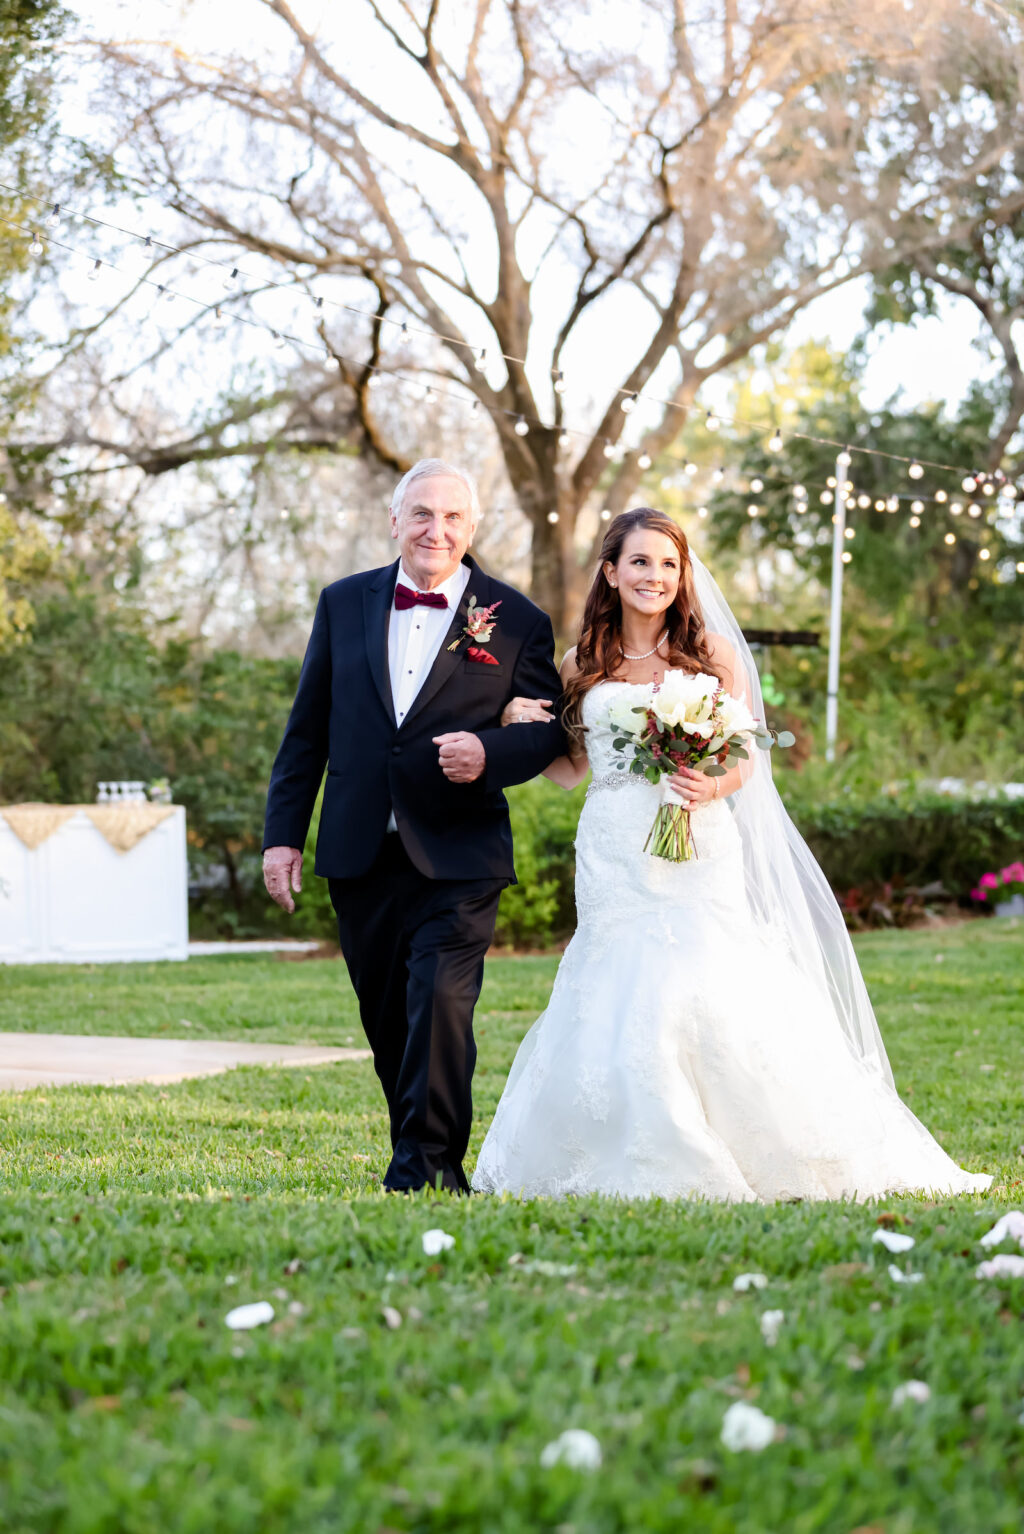 Romantic Classic Bride Walking with Father Down the Wedding Ceremony Aisle | Tampa Bay Wedding Photographer Lifelong Photography Studio | Wedding Dress Truly Forever Bridal